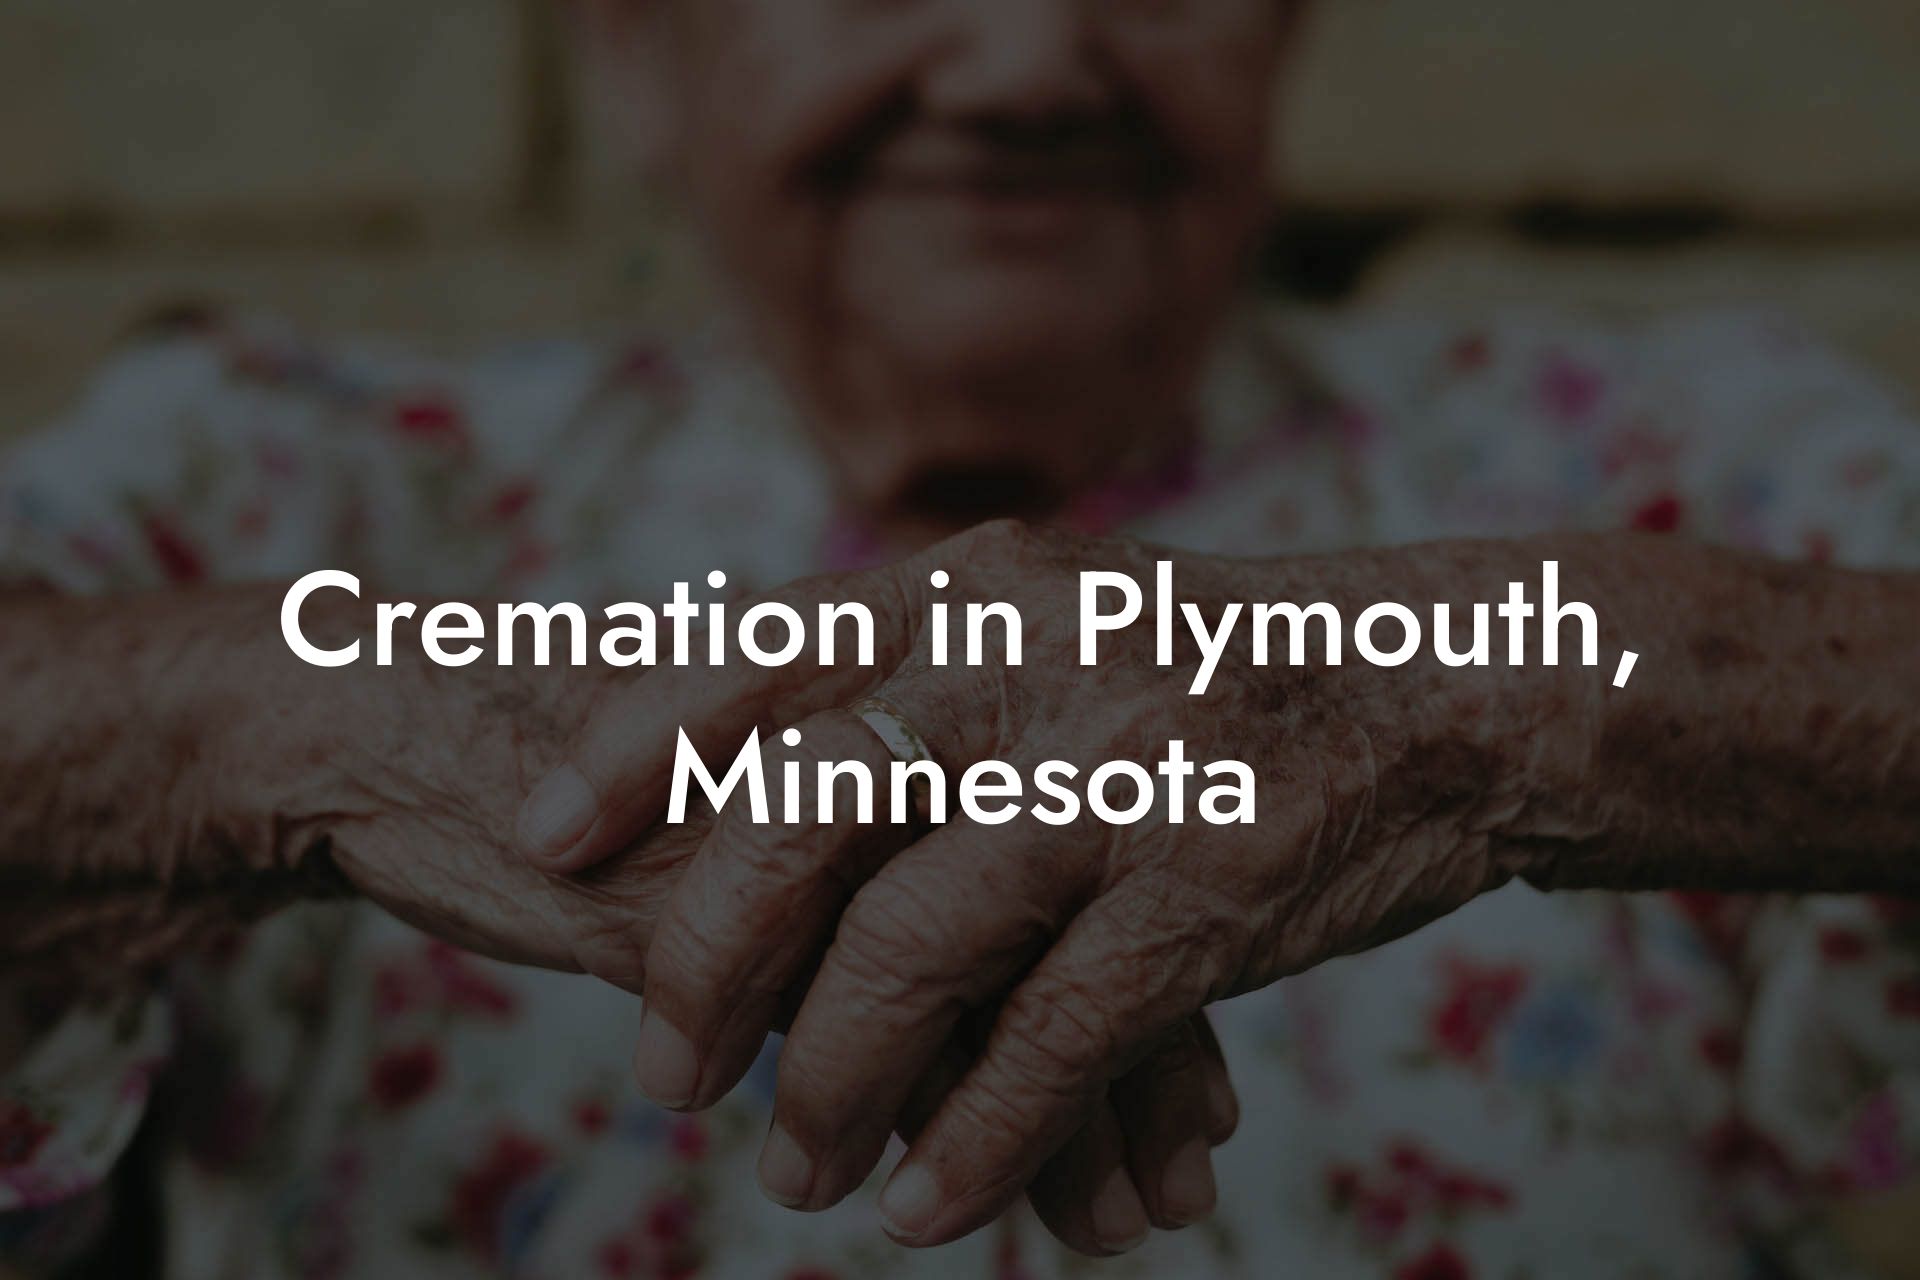 Cremation in Plymouth, Minnesota